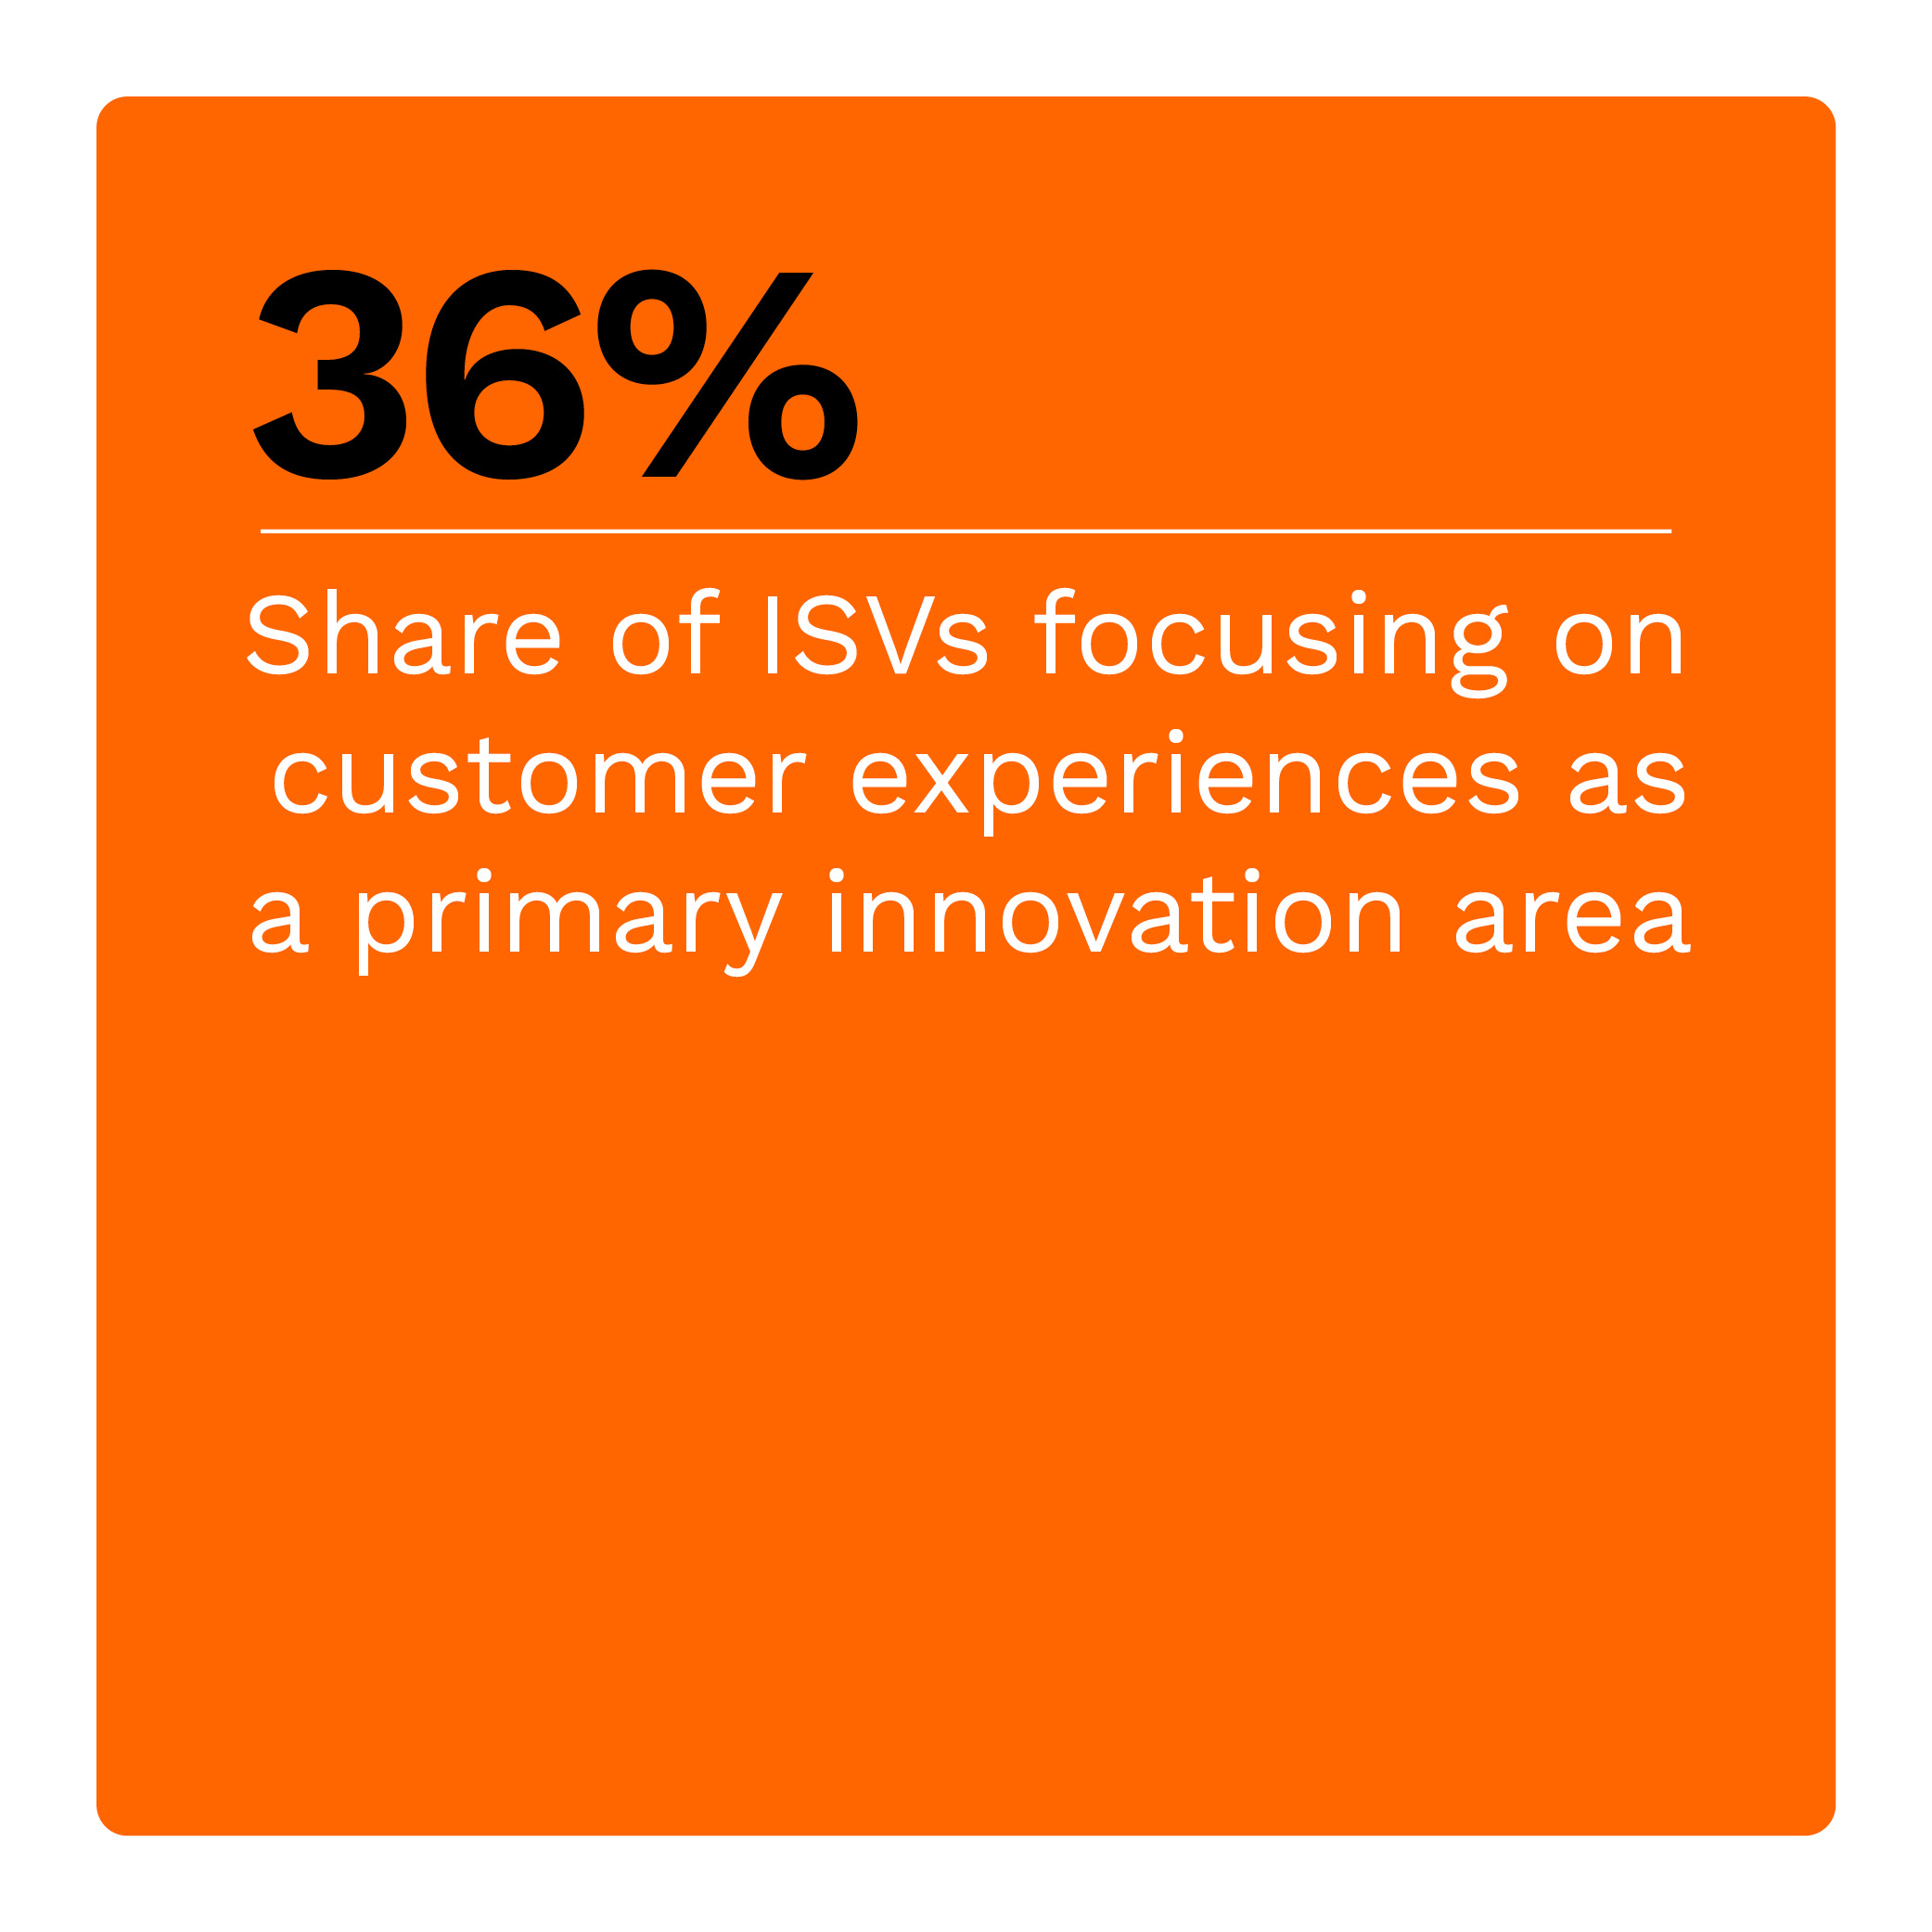  Share of ISVs focusing on customer experiences as a primary innovation area